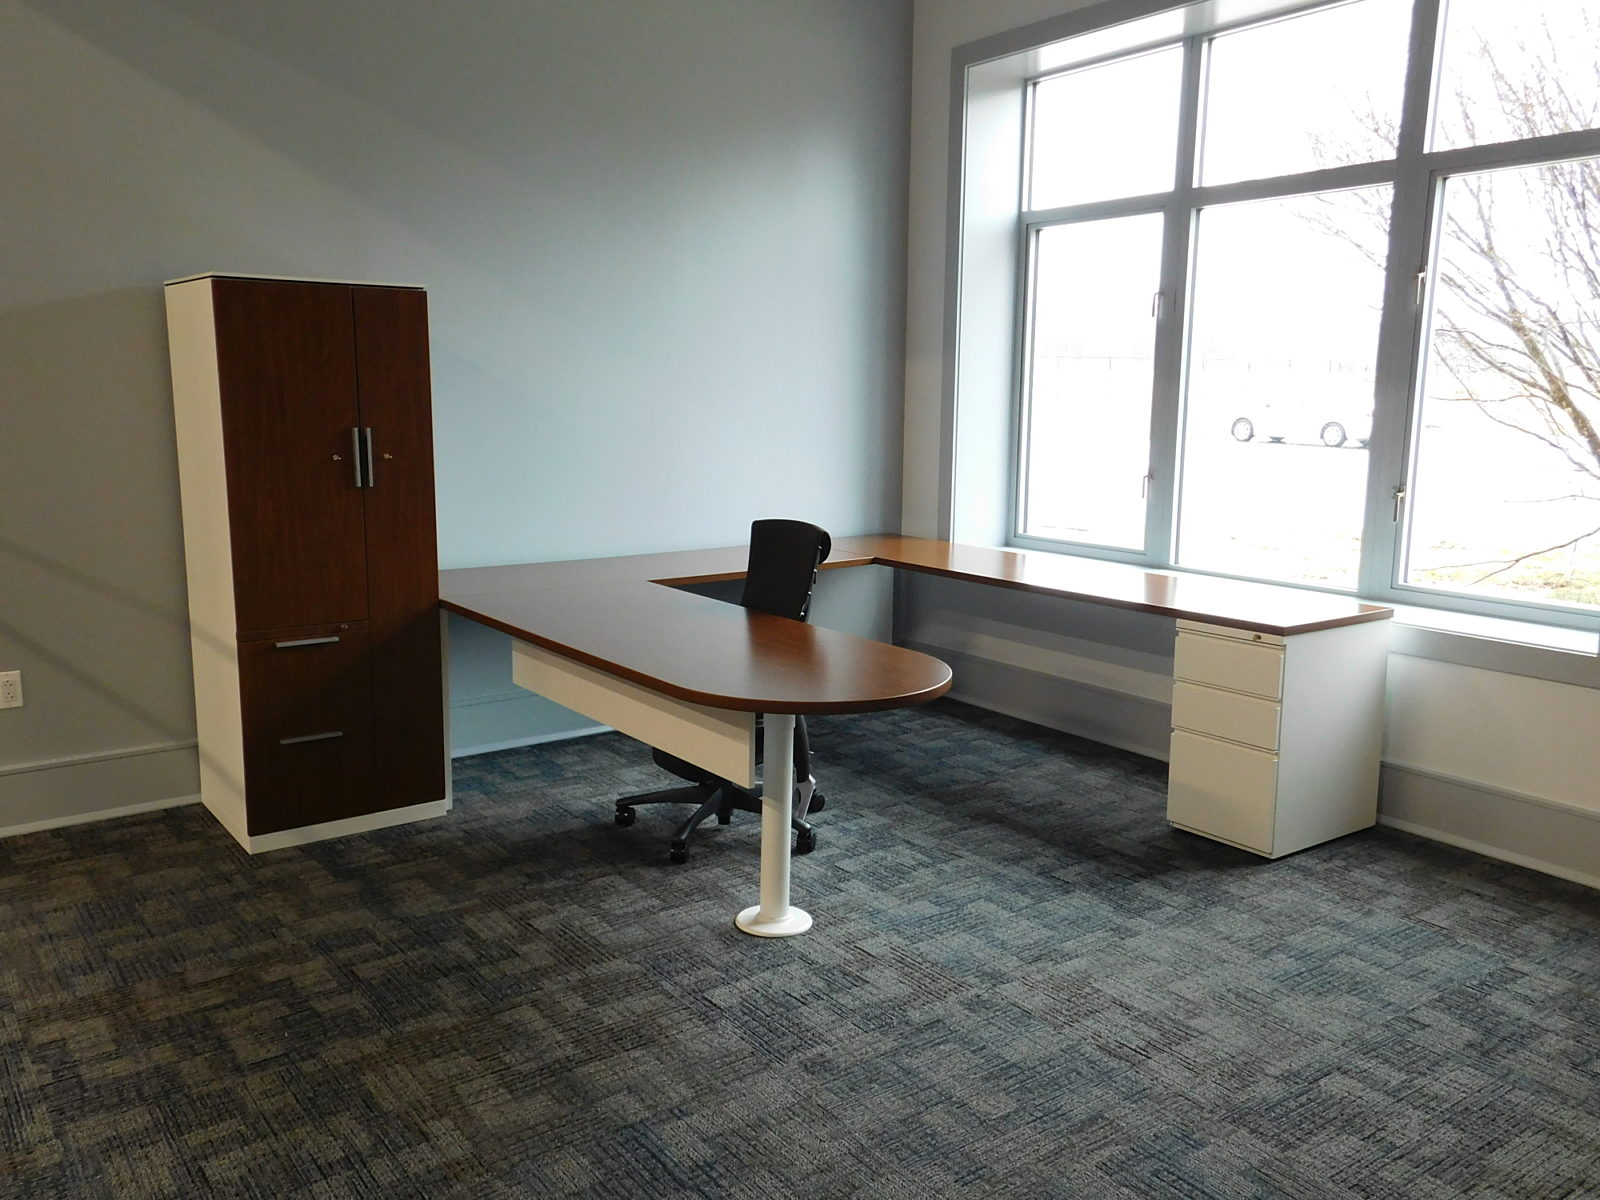 Private office with U-shape desk with wood and white finishes